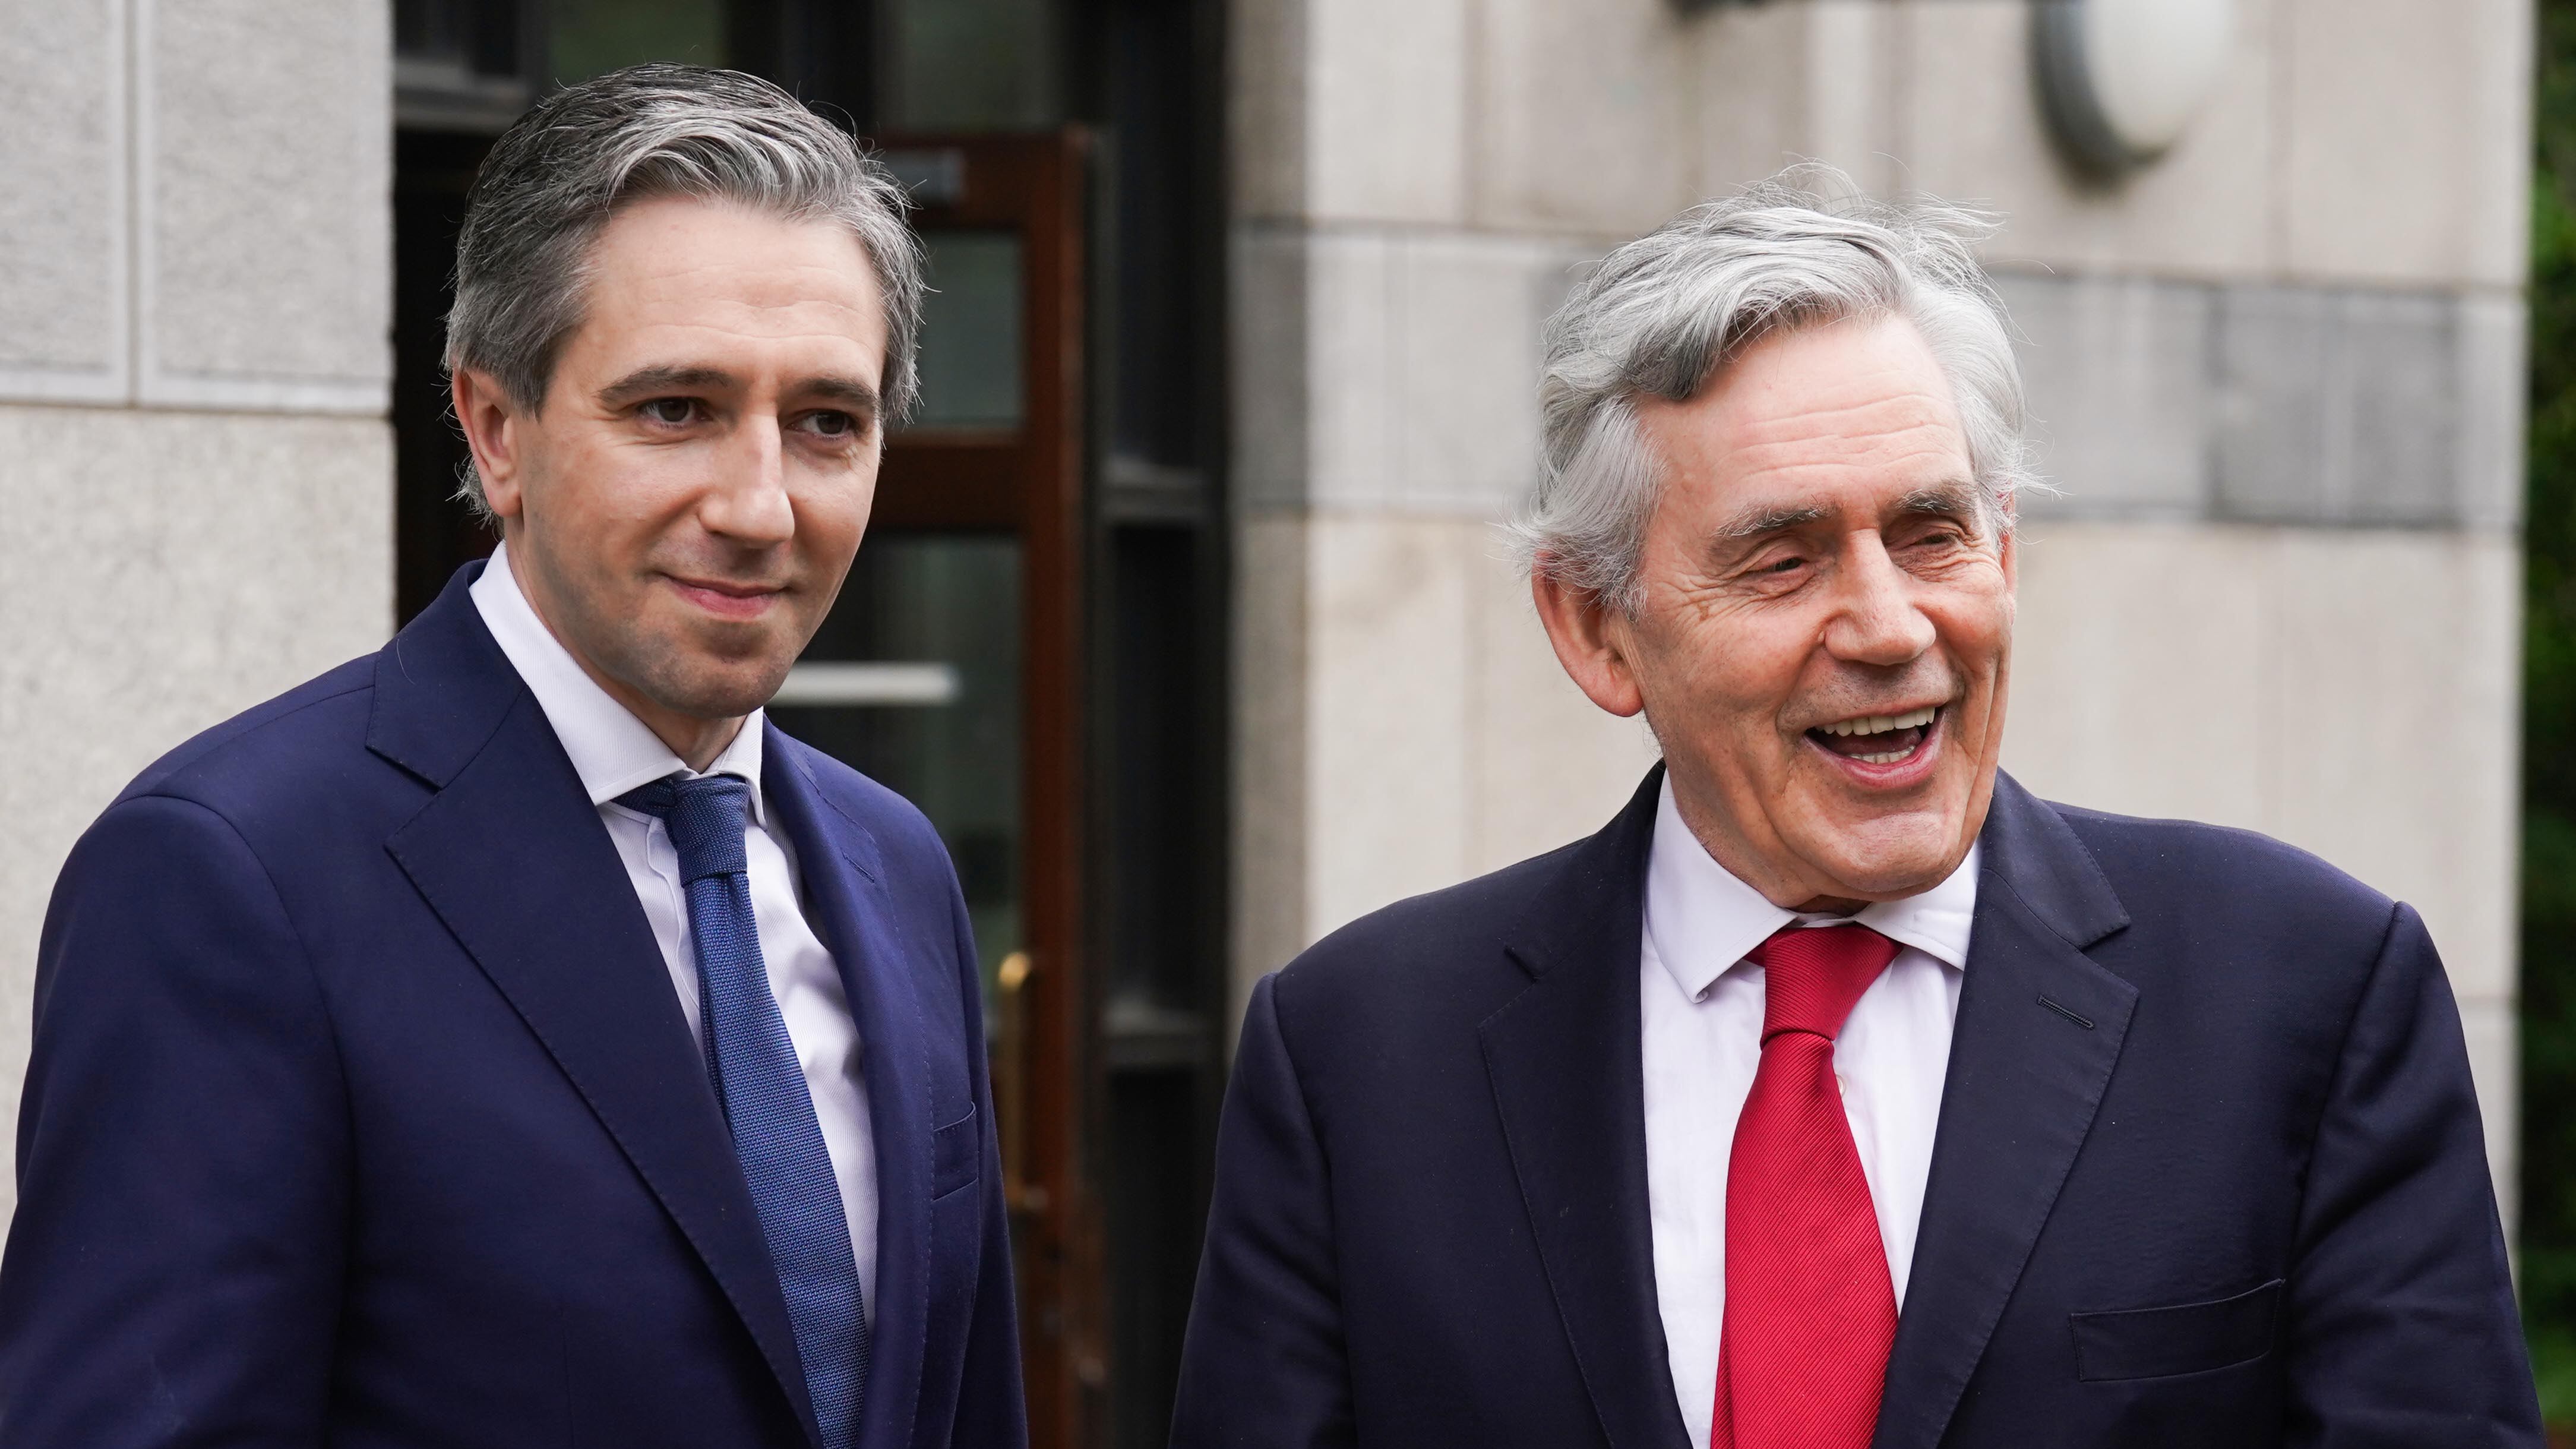 Taoiseach Simon Harris (left) and former UK prime minister Gordon Brown arrive at the inaugural Child Poverty and Well-being Summit at Hibernia Conference Centre, Dublin Castle